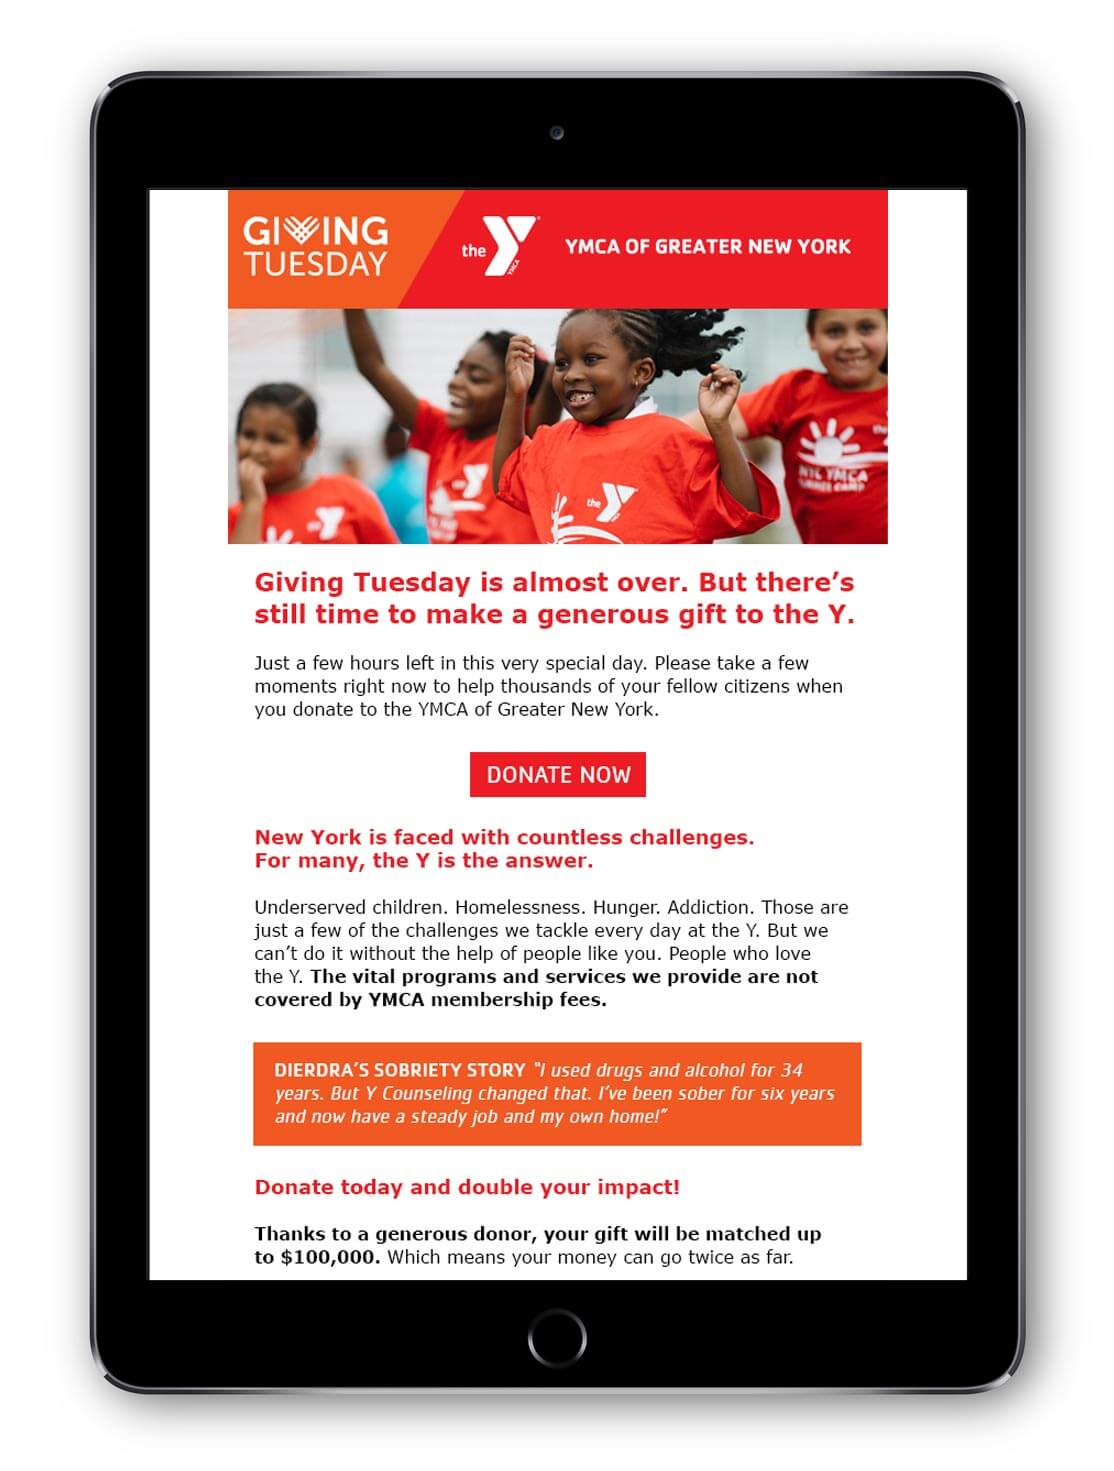 YMCA. Giving Tuesday is almost over. Still time to make a gift.